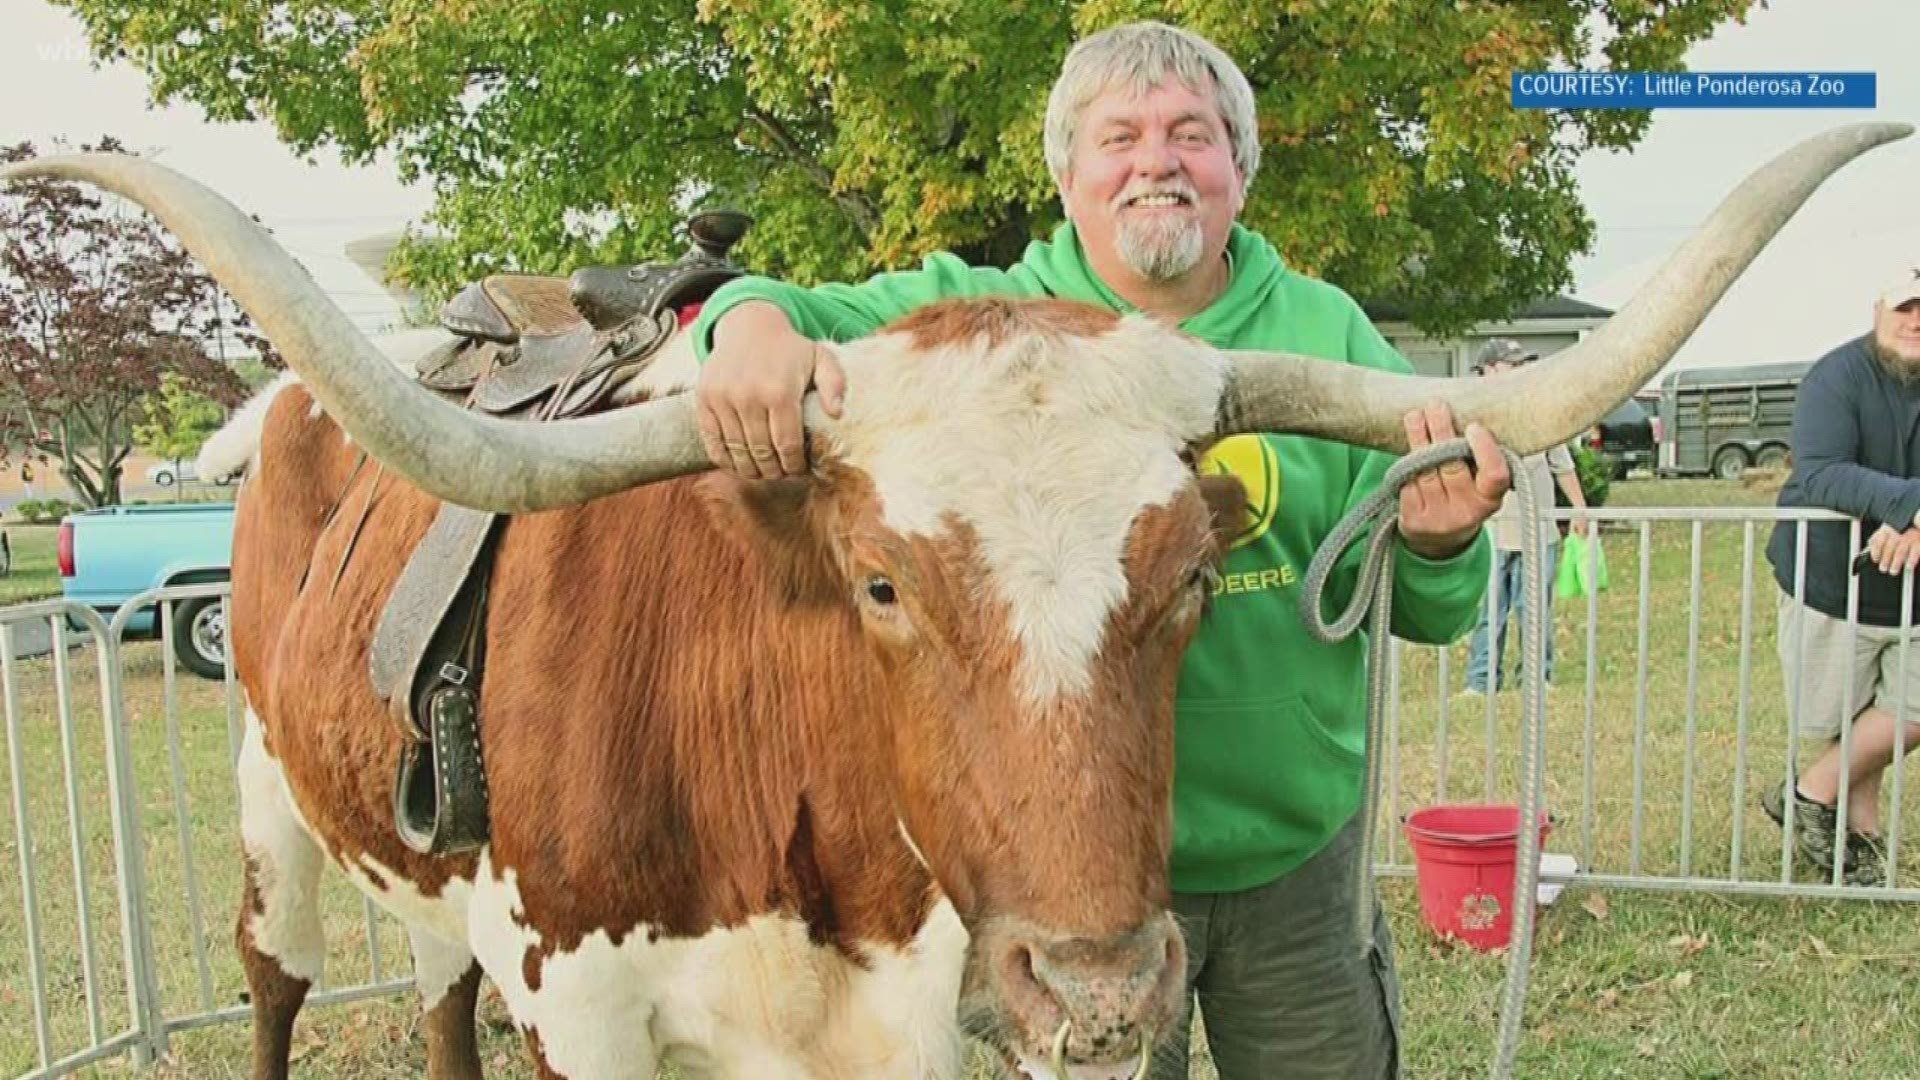 Buster, who was the mascot at Anderson County High School  and appeared on tv shows and music videos, has died. The longhorn steer was believed to be 34 years old.